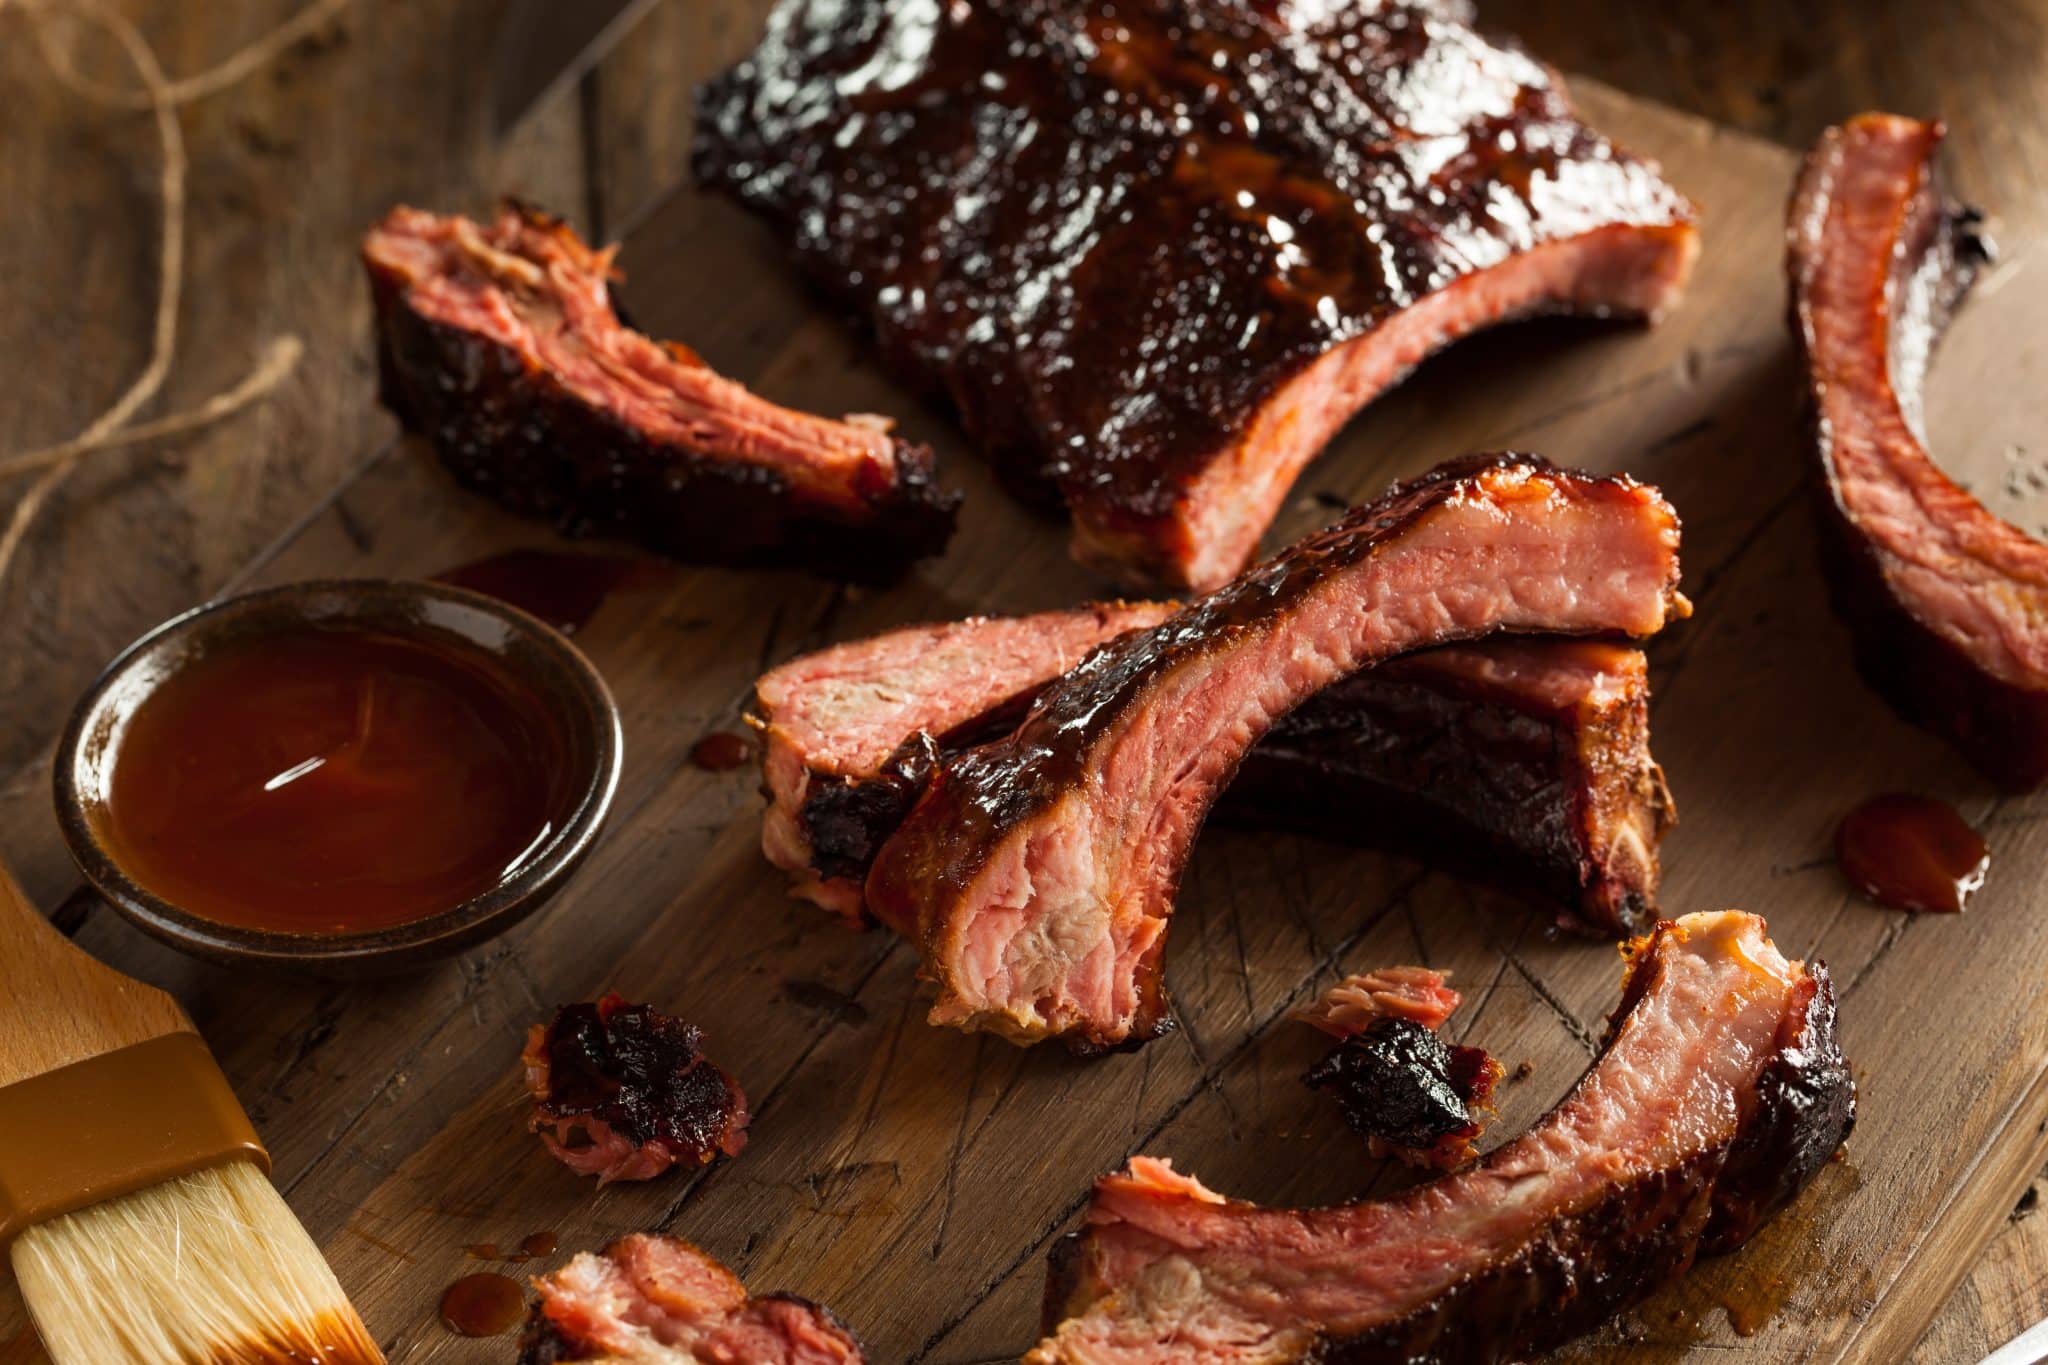 Atlanta was named the most barbecue-obsessed city in the U.S.